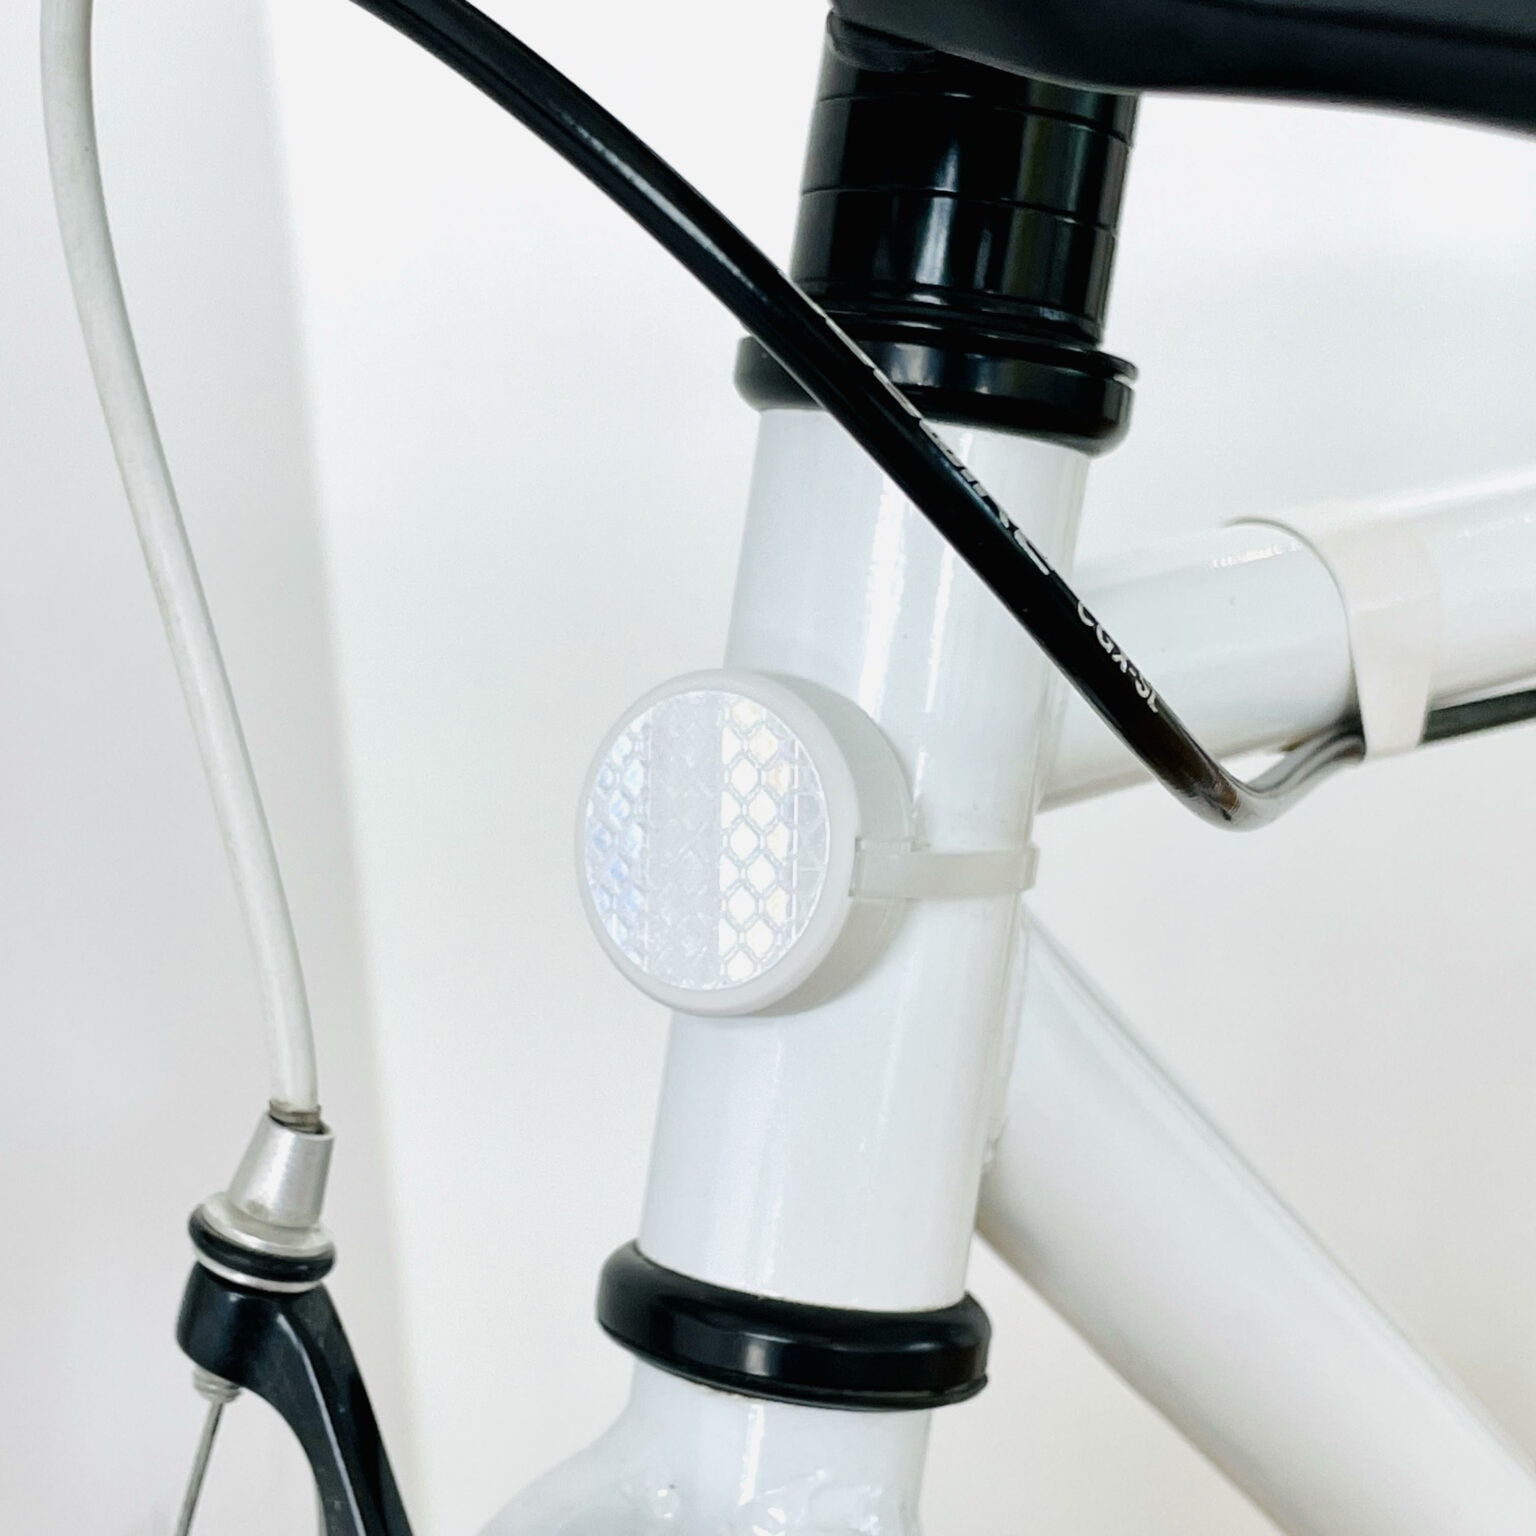 A great bike reflector with a hidden place for your AirTag